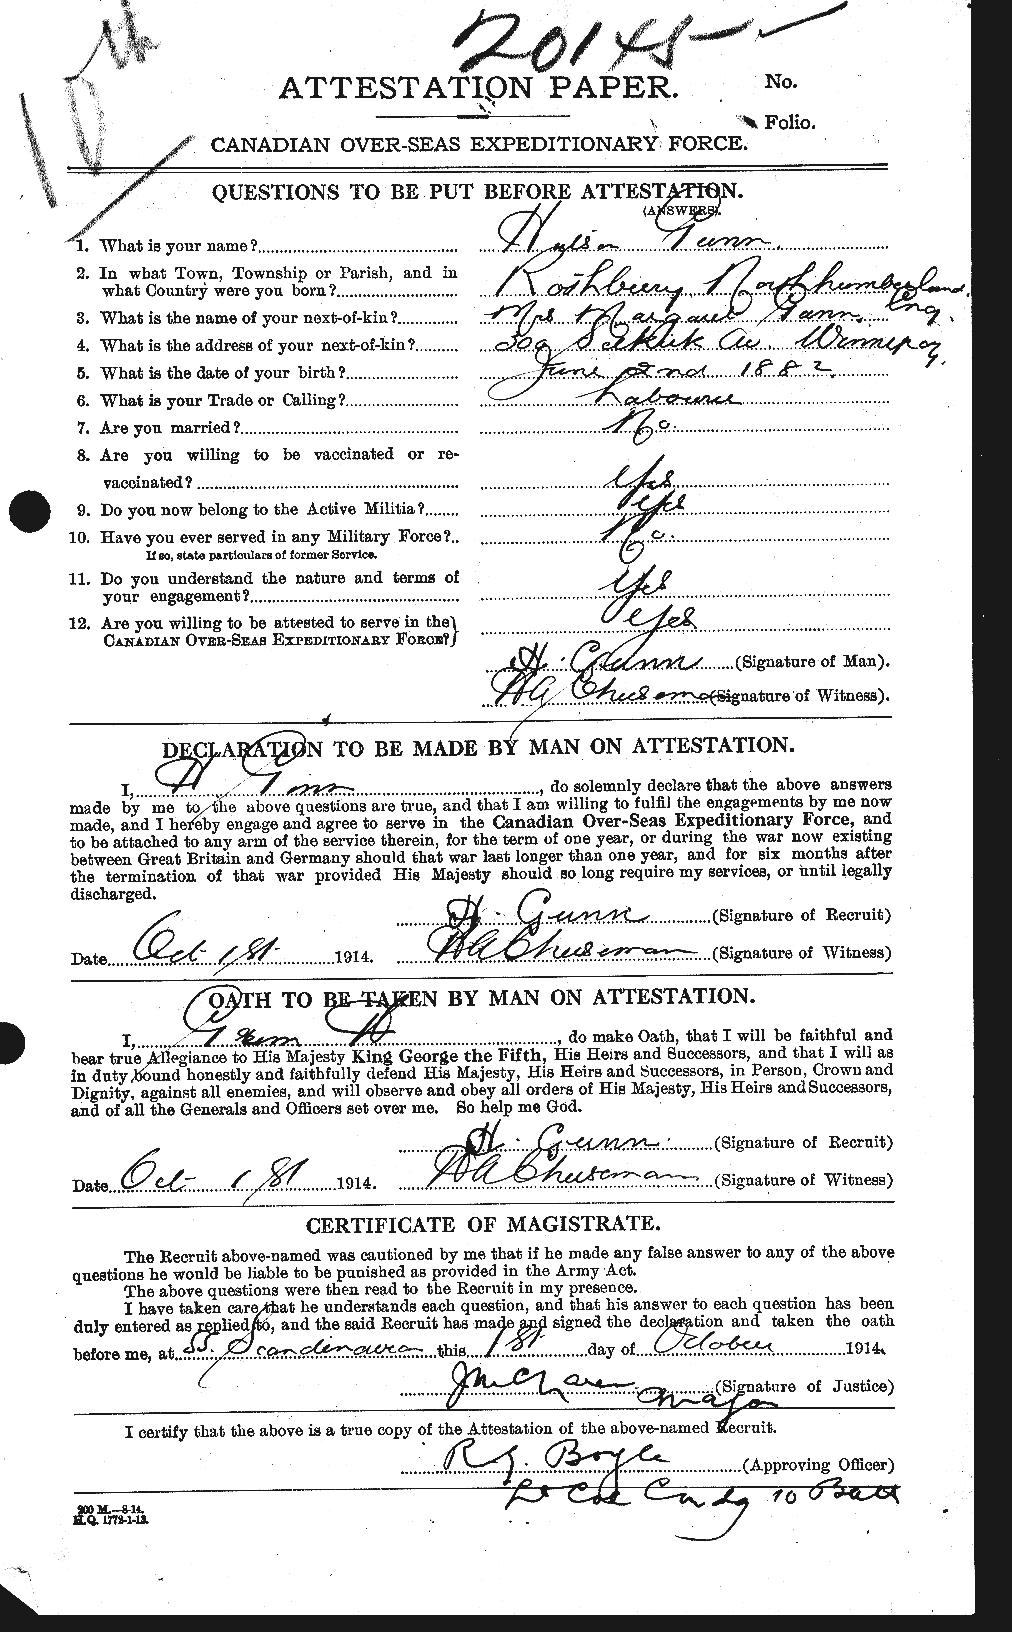 Personnel Records of the First World War - CEF 369264a